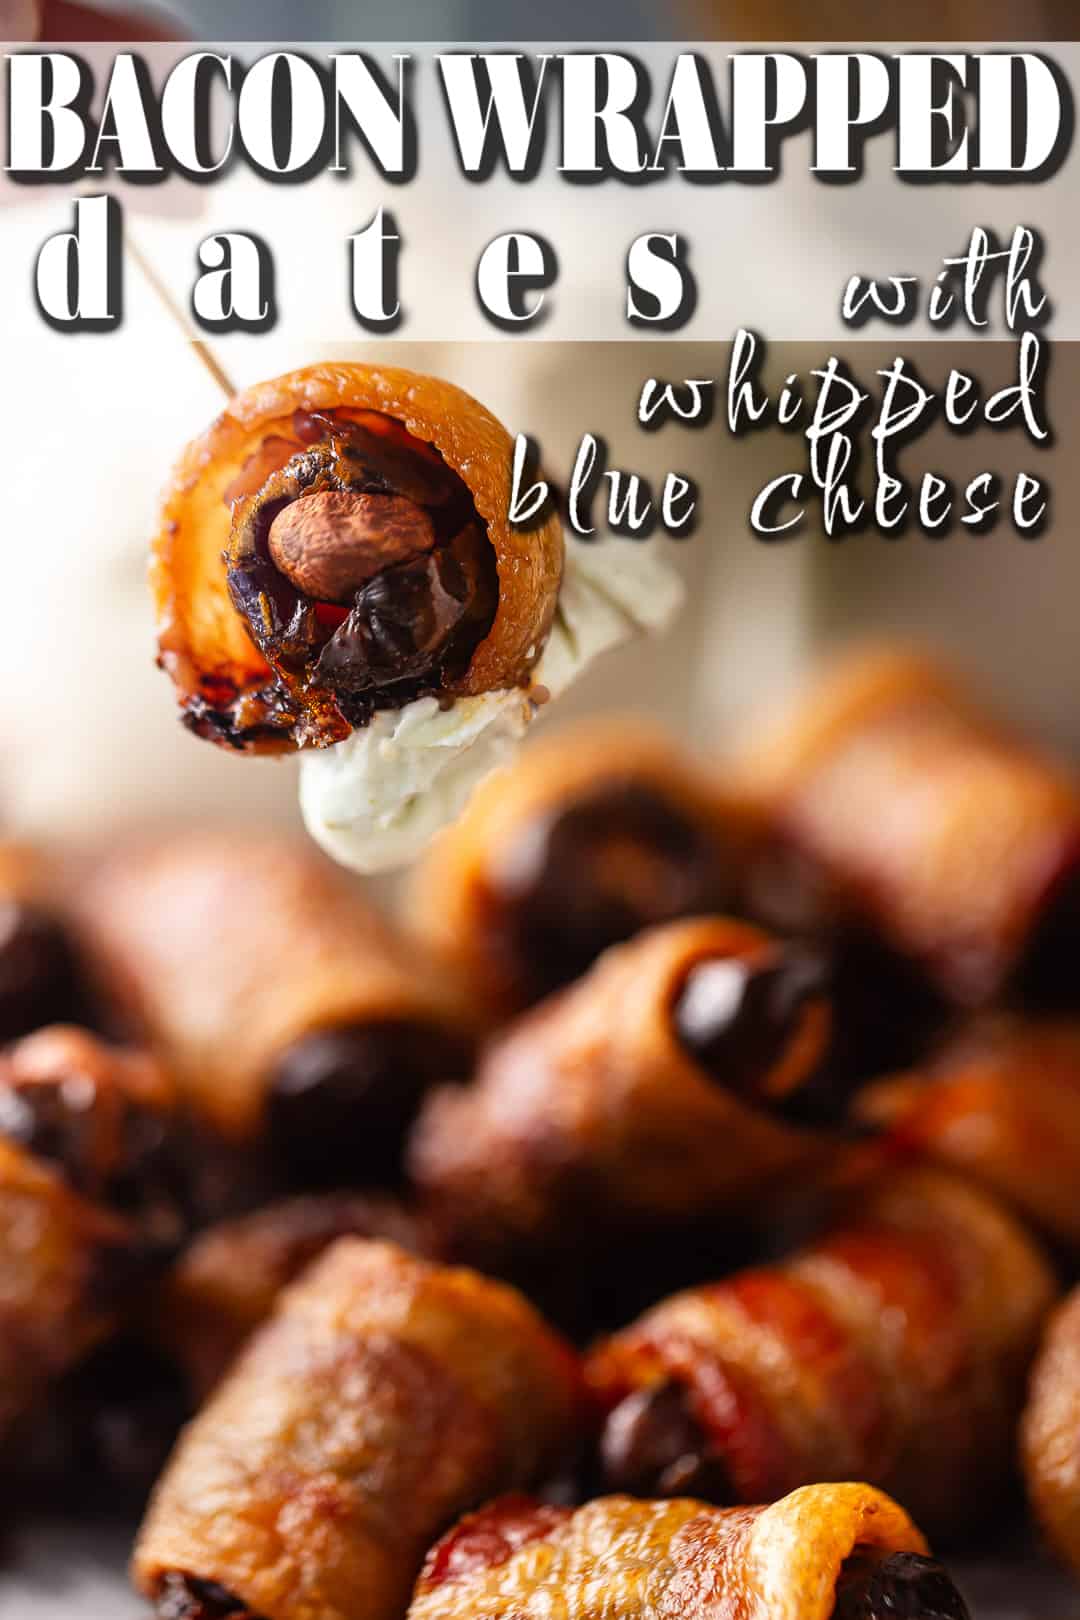 Bacon wrapped dates recipe, prepared and served with whipped blue cheese dip.